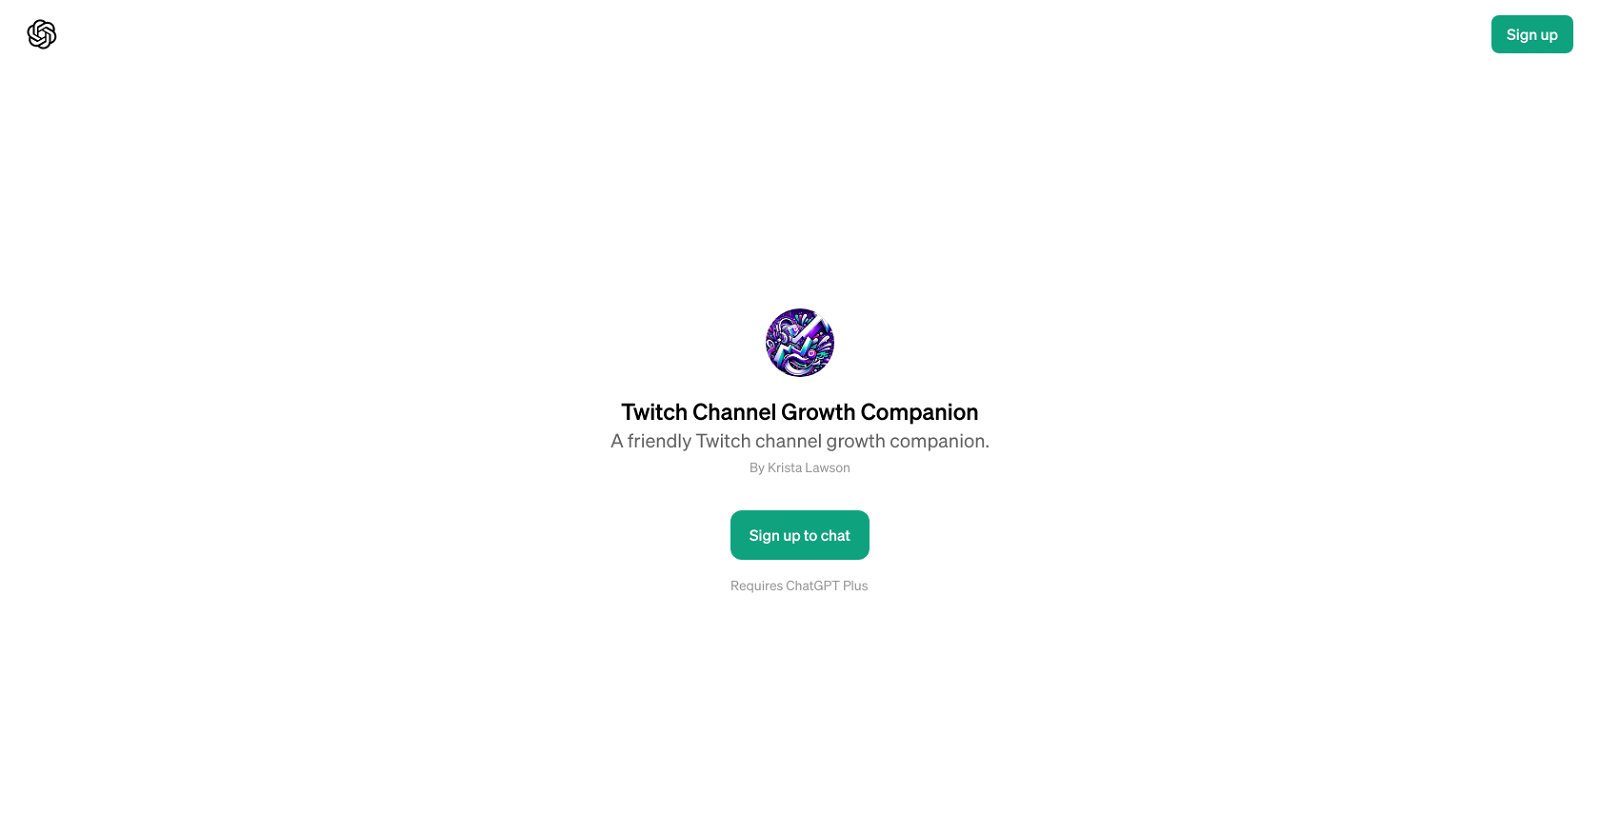 Twitch Channel Growth Companion website